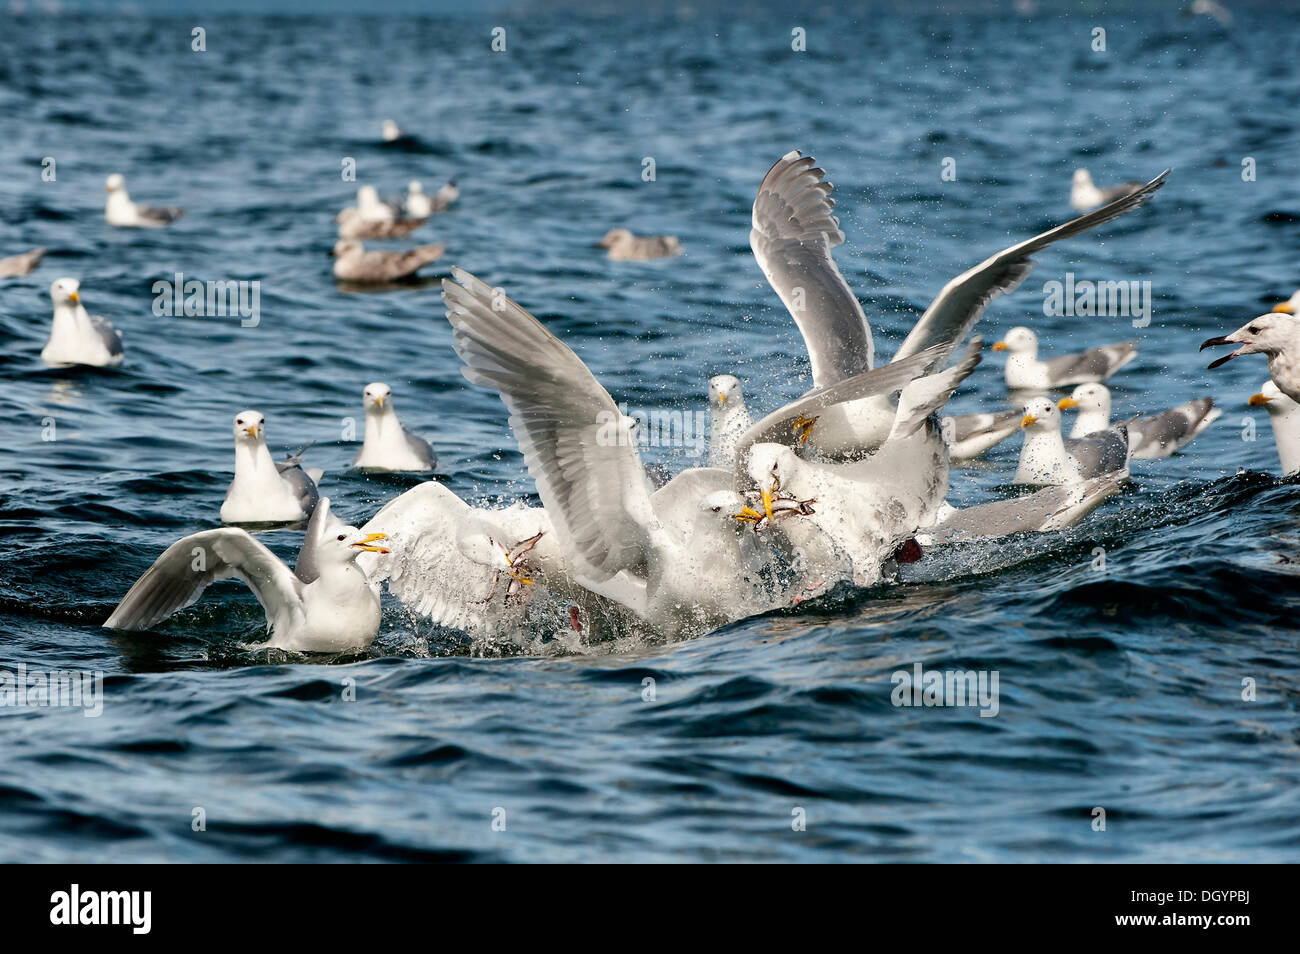 Glaucous-winged gulls (Larus glaucescens) feed on herring in the Gulf of Alaska Stock Photo